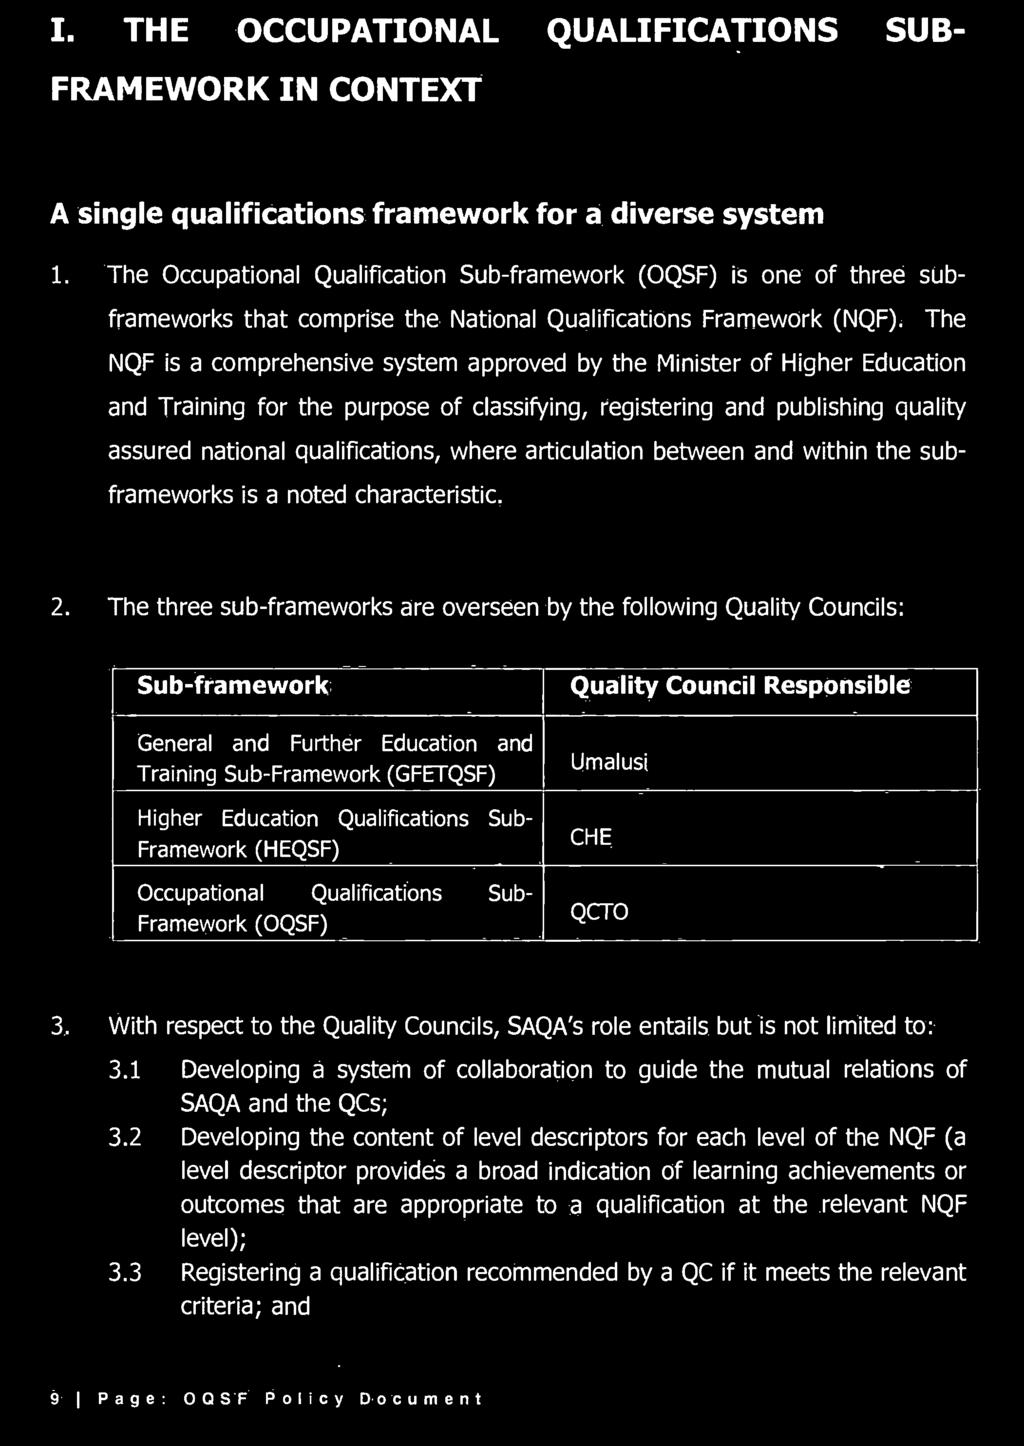 The NQF is a comprehensive system approved by the Minister of Higher Education and Training for the purpose of classifying, registering and publishing quality assured national qualifications, where